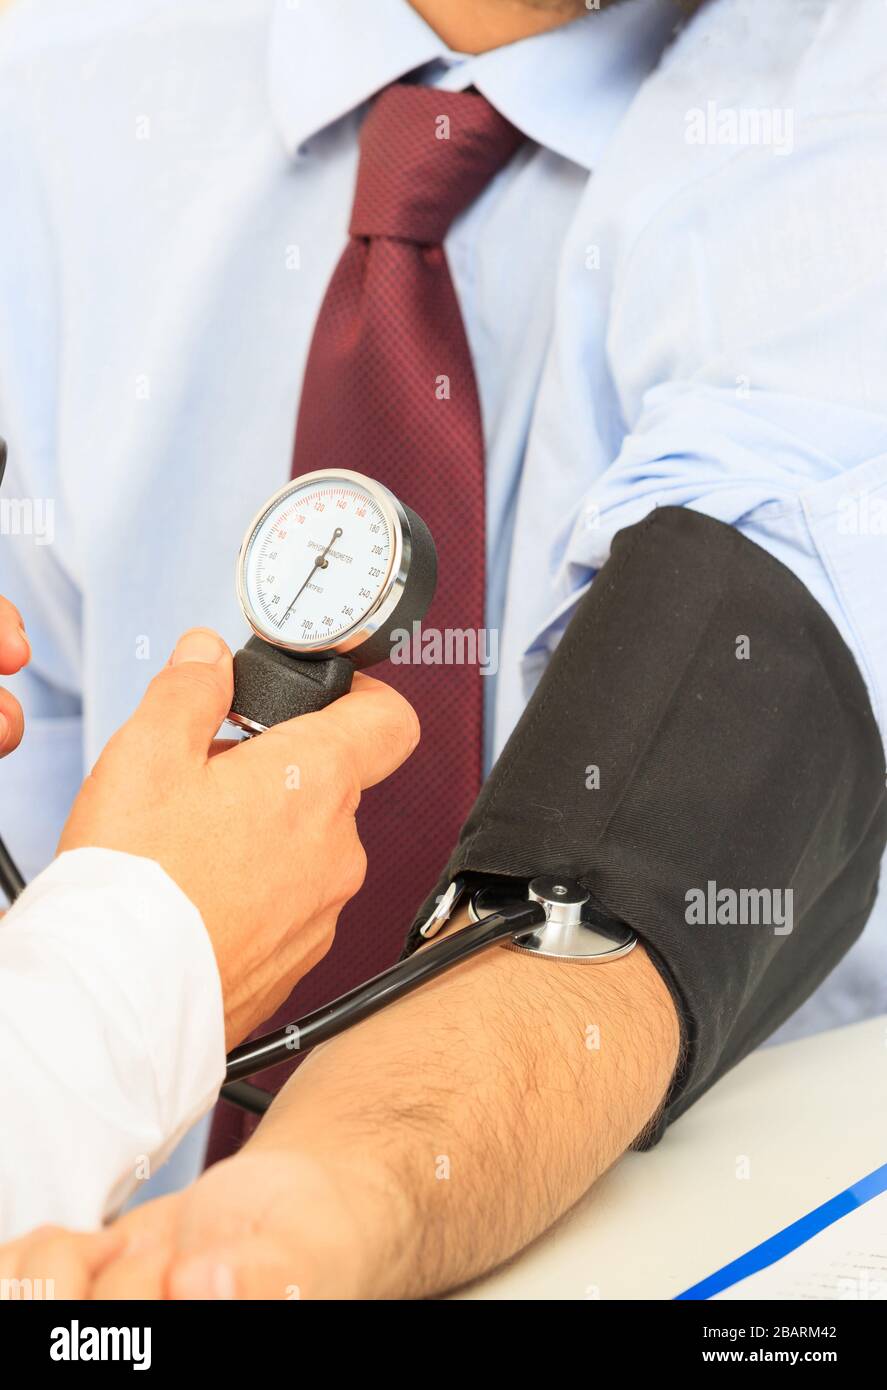 Hypertension, medical checkup concept. Doctor GP checking patient blood pressure, closeup view Stock Photo